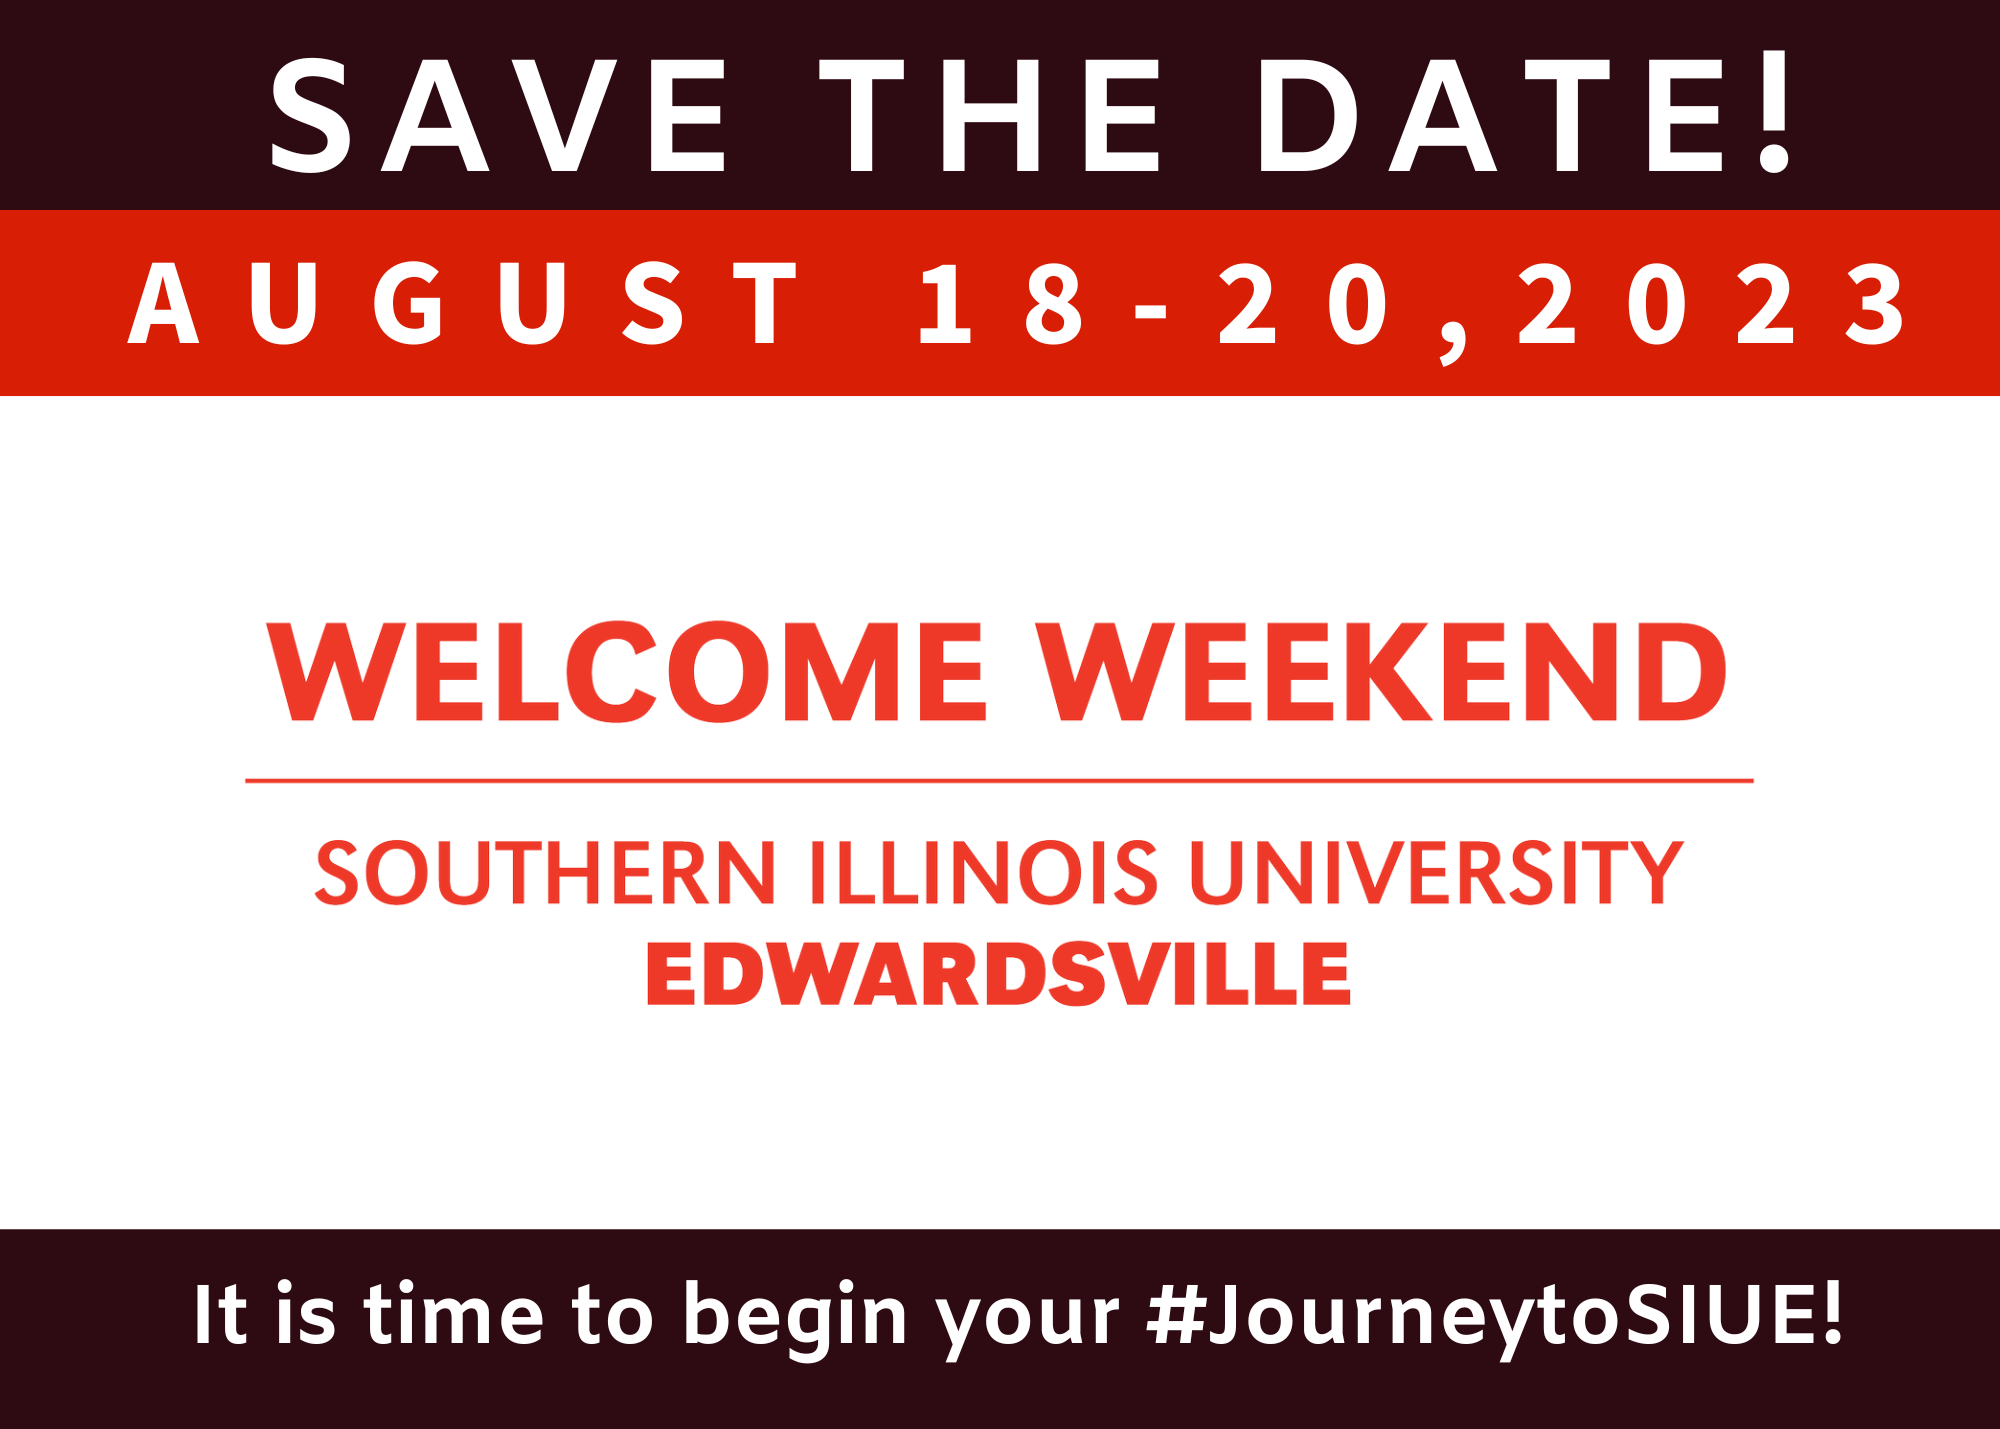 There is an image of a postcard that says "Save The Date" in white and then "August 18-20, 2023" in white. Under that it says "Welcome Weekend" in red text. Under that is has the Southern Illinois University Edwardsville signature line.  At the bottom it says "It is time to begin your #JourneytoSIUE!"